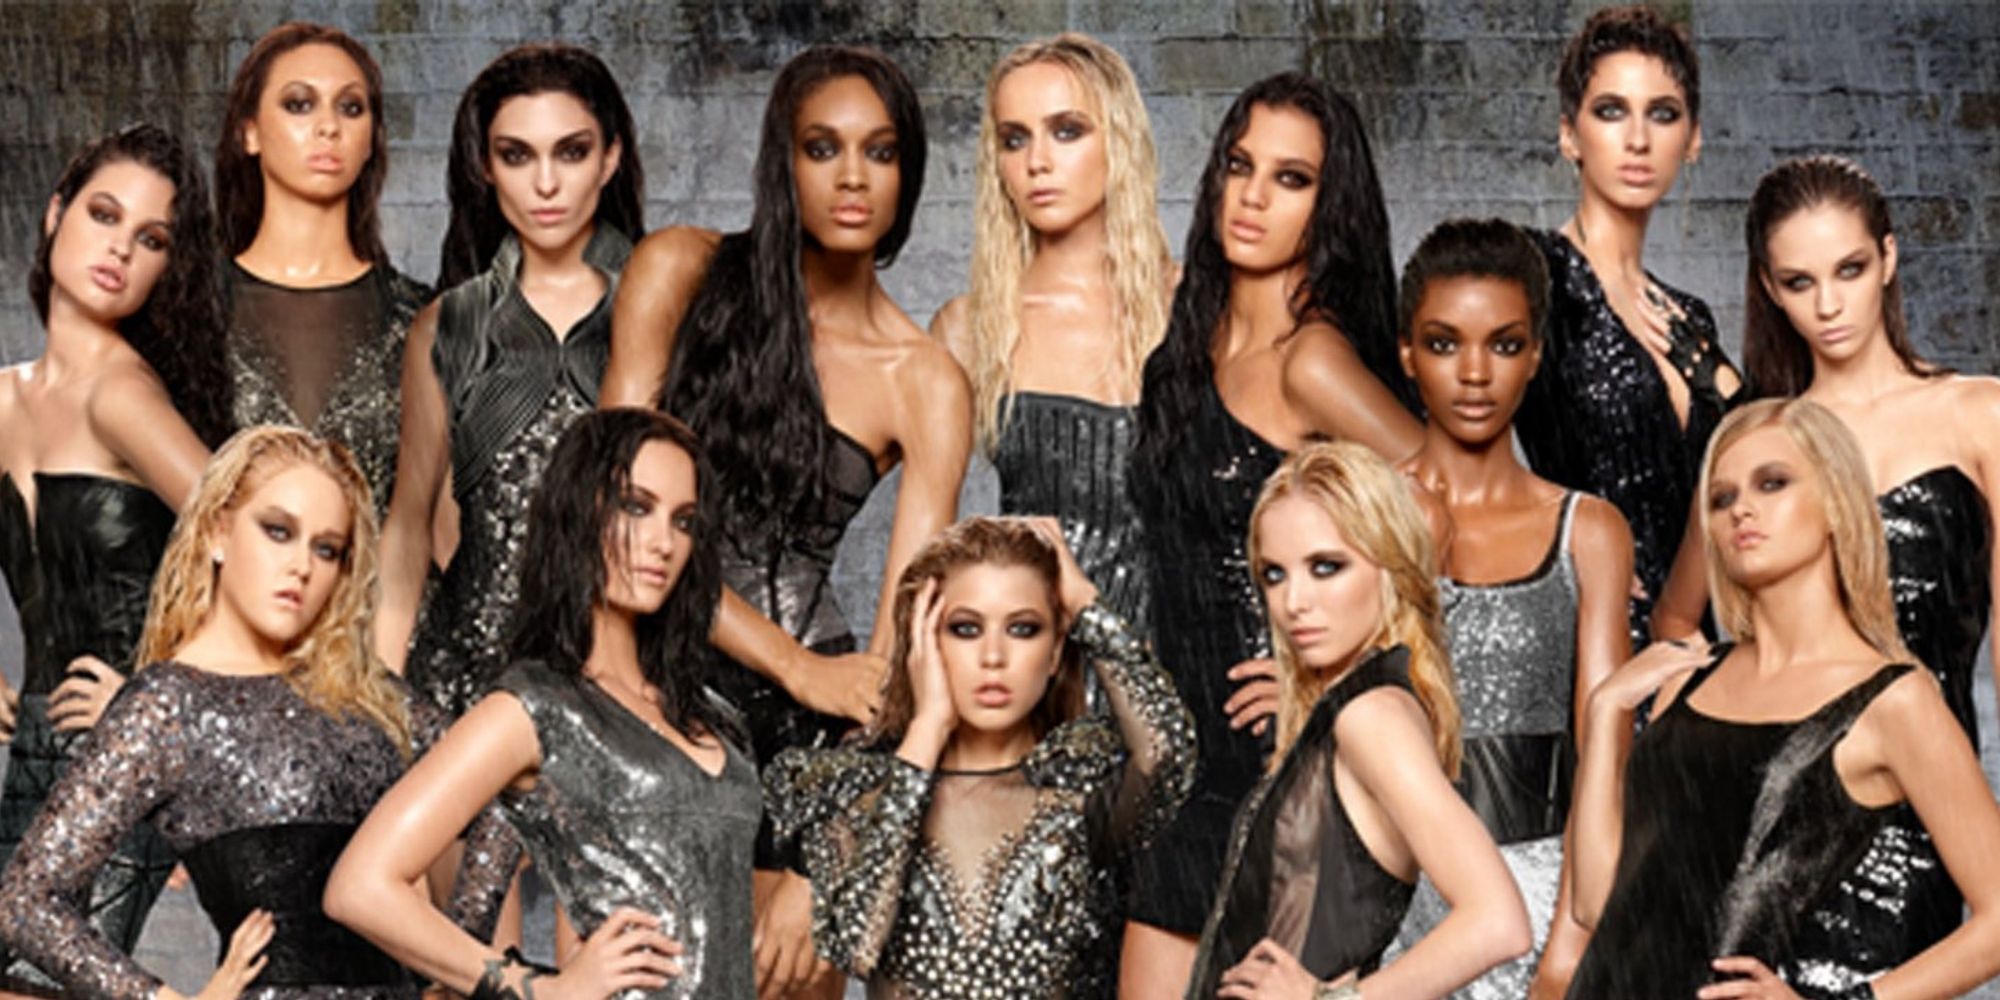 The cast of ANTM Cycle 9